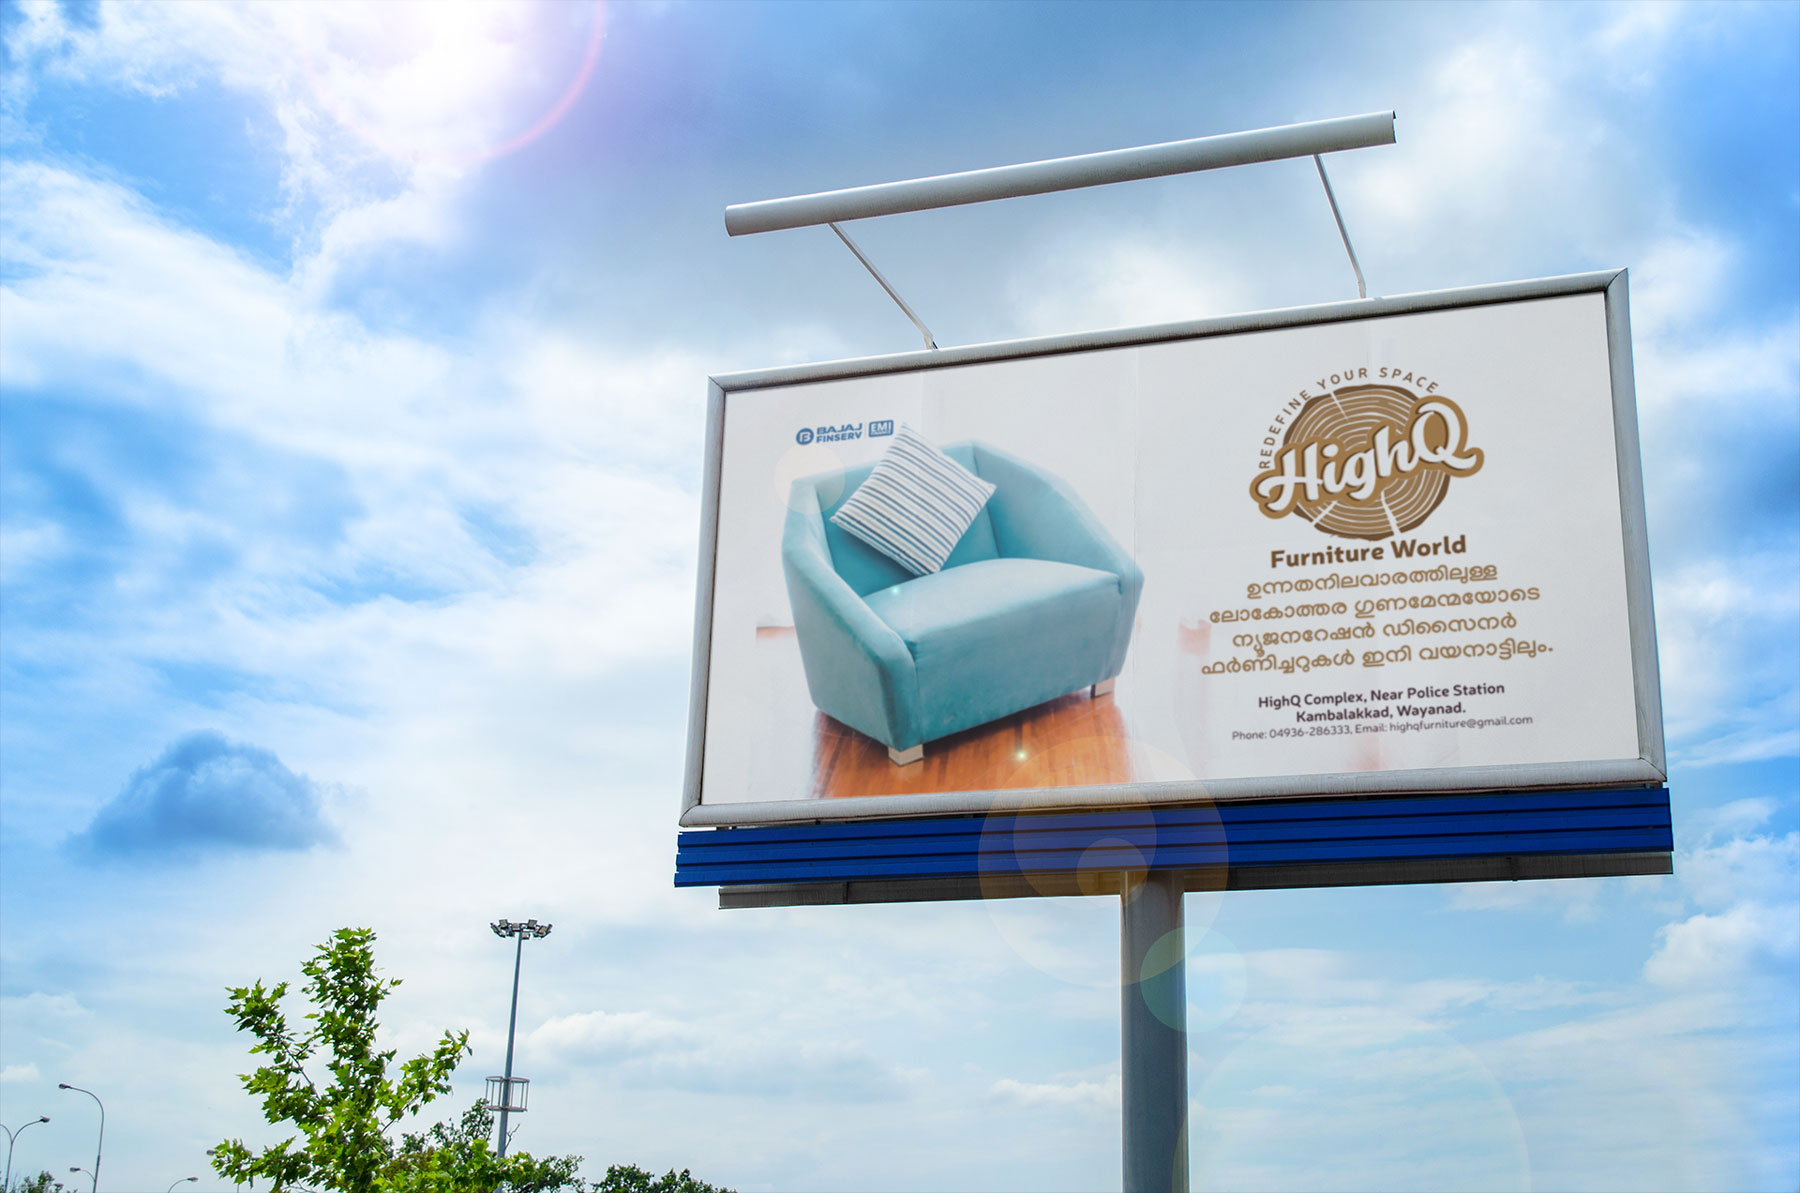 Hoarding for a furniture brand